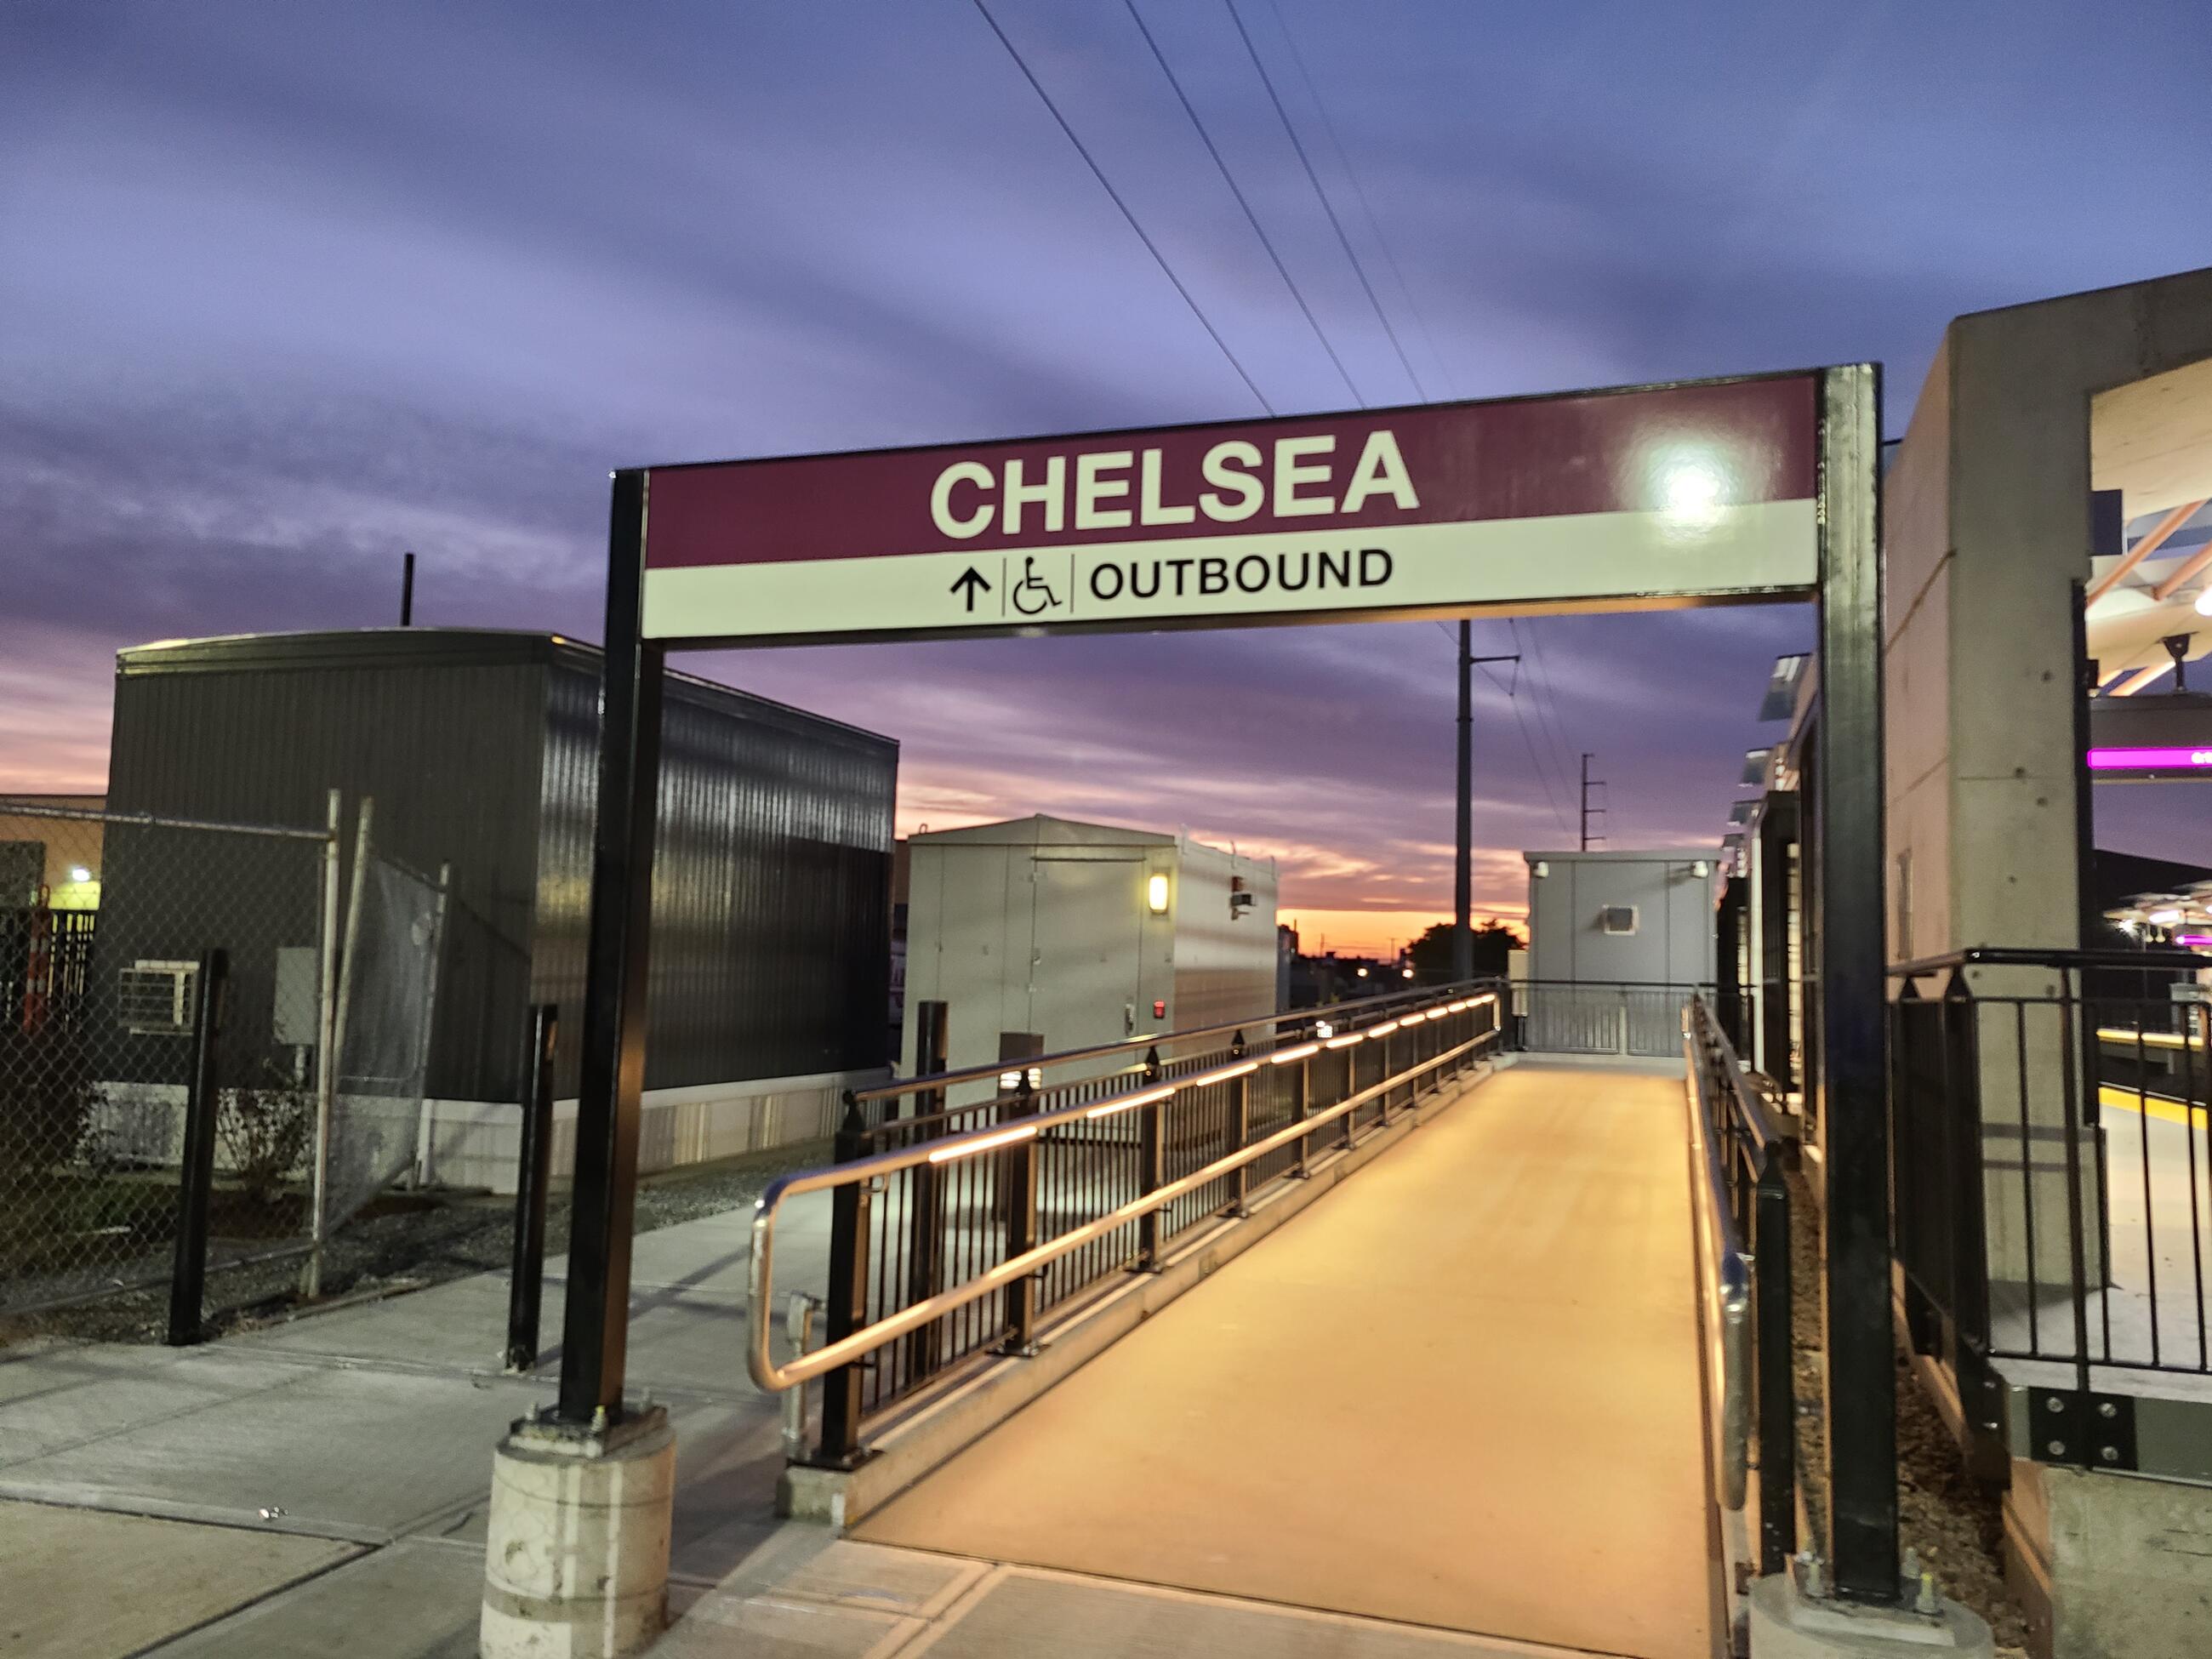 The new station sign has been installed over the ramp connecting the Silver Line to the Chelsea Commuter Rail station's outbound platform (October 2021)